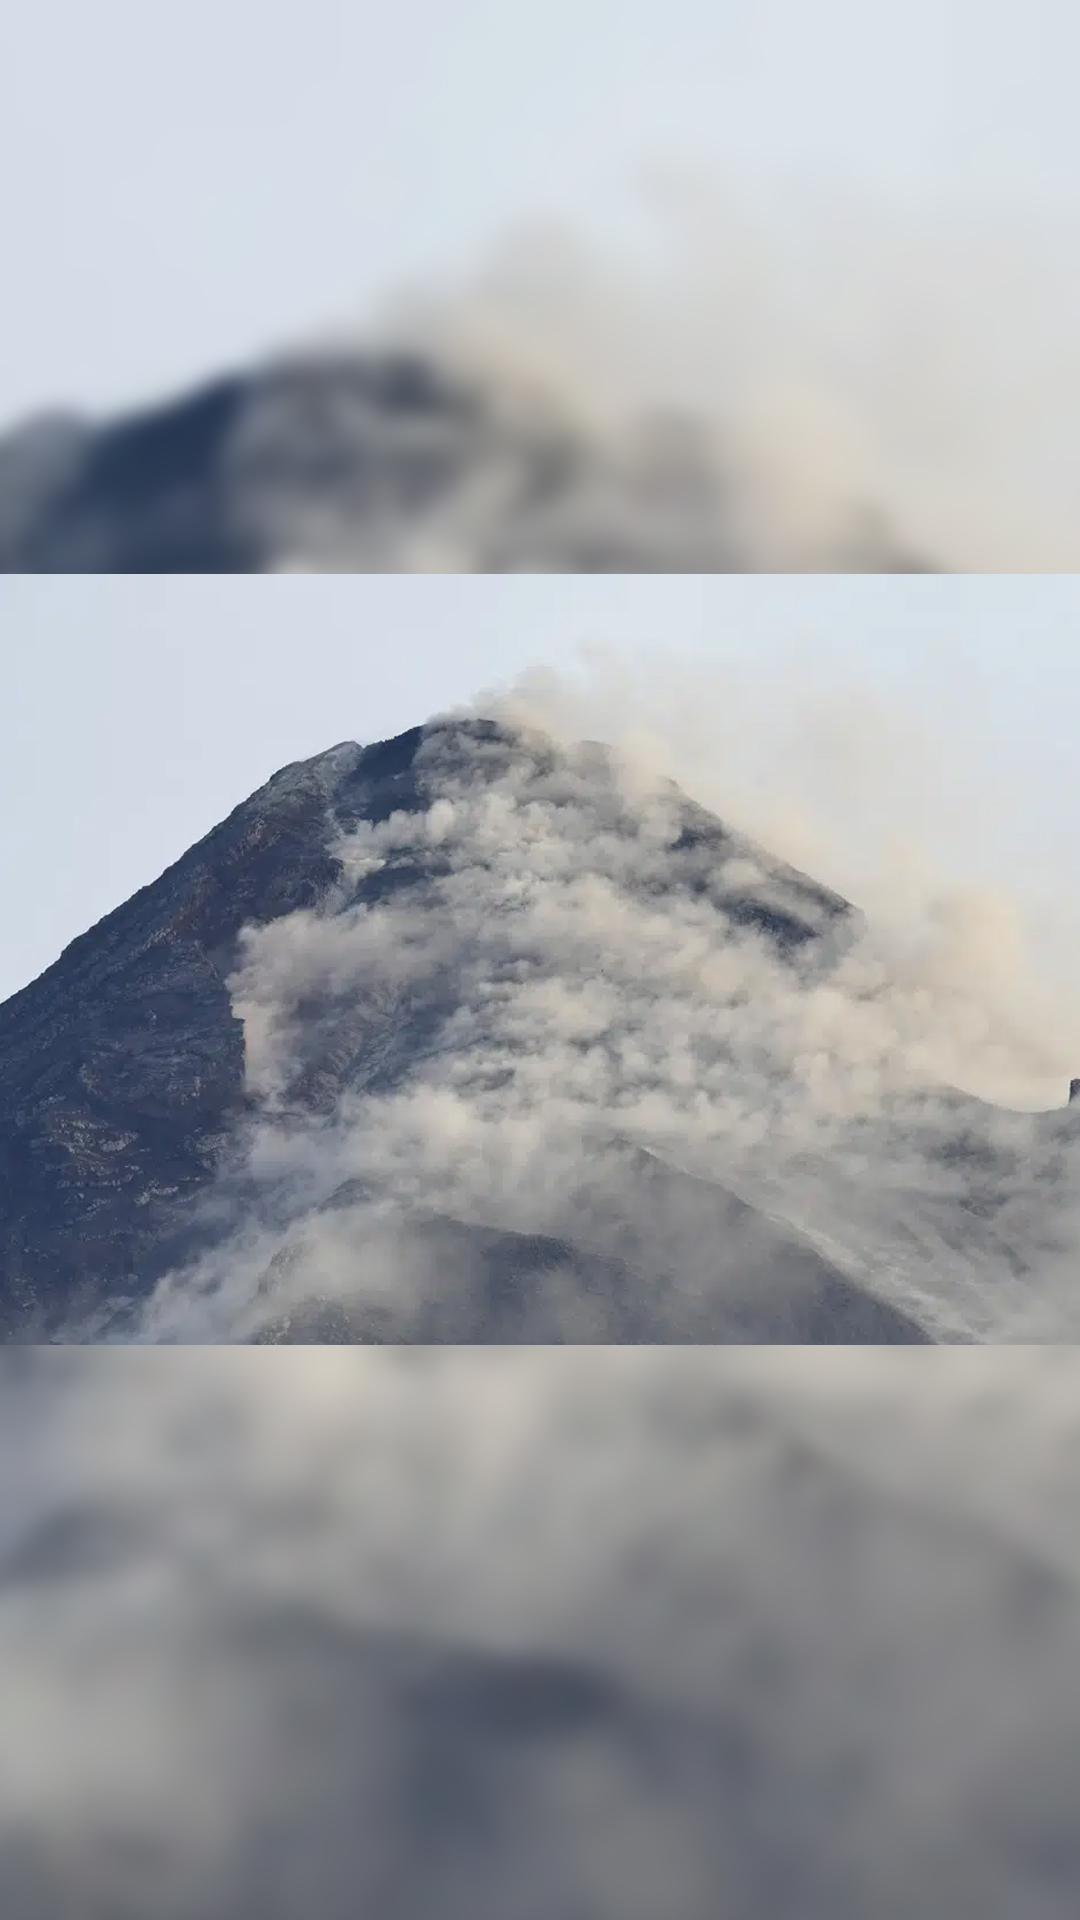 Philippines' Mayon volcano simmers